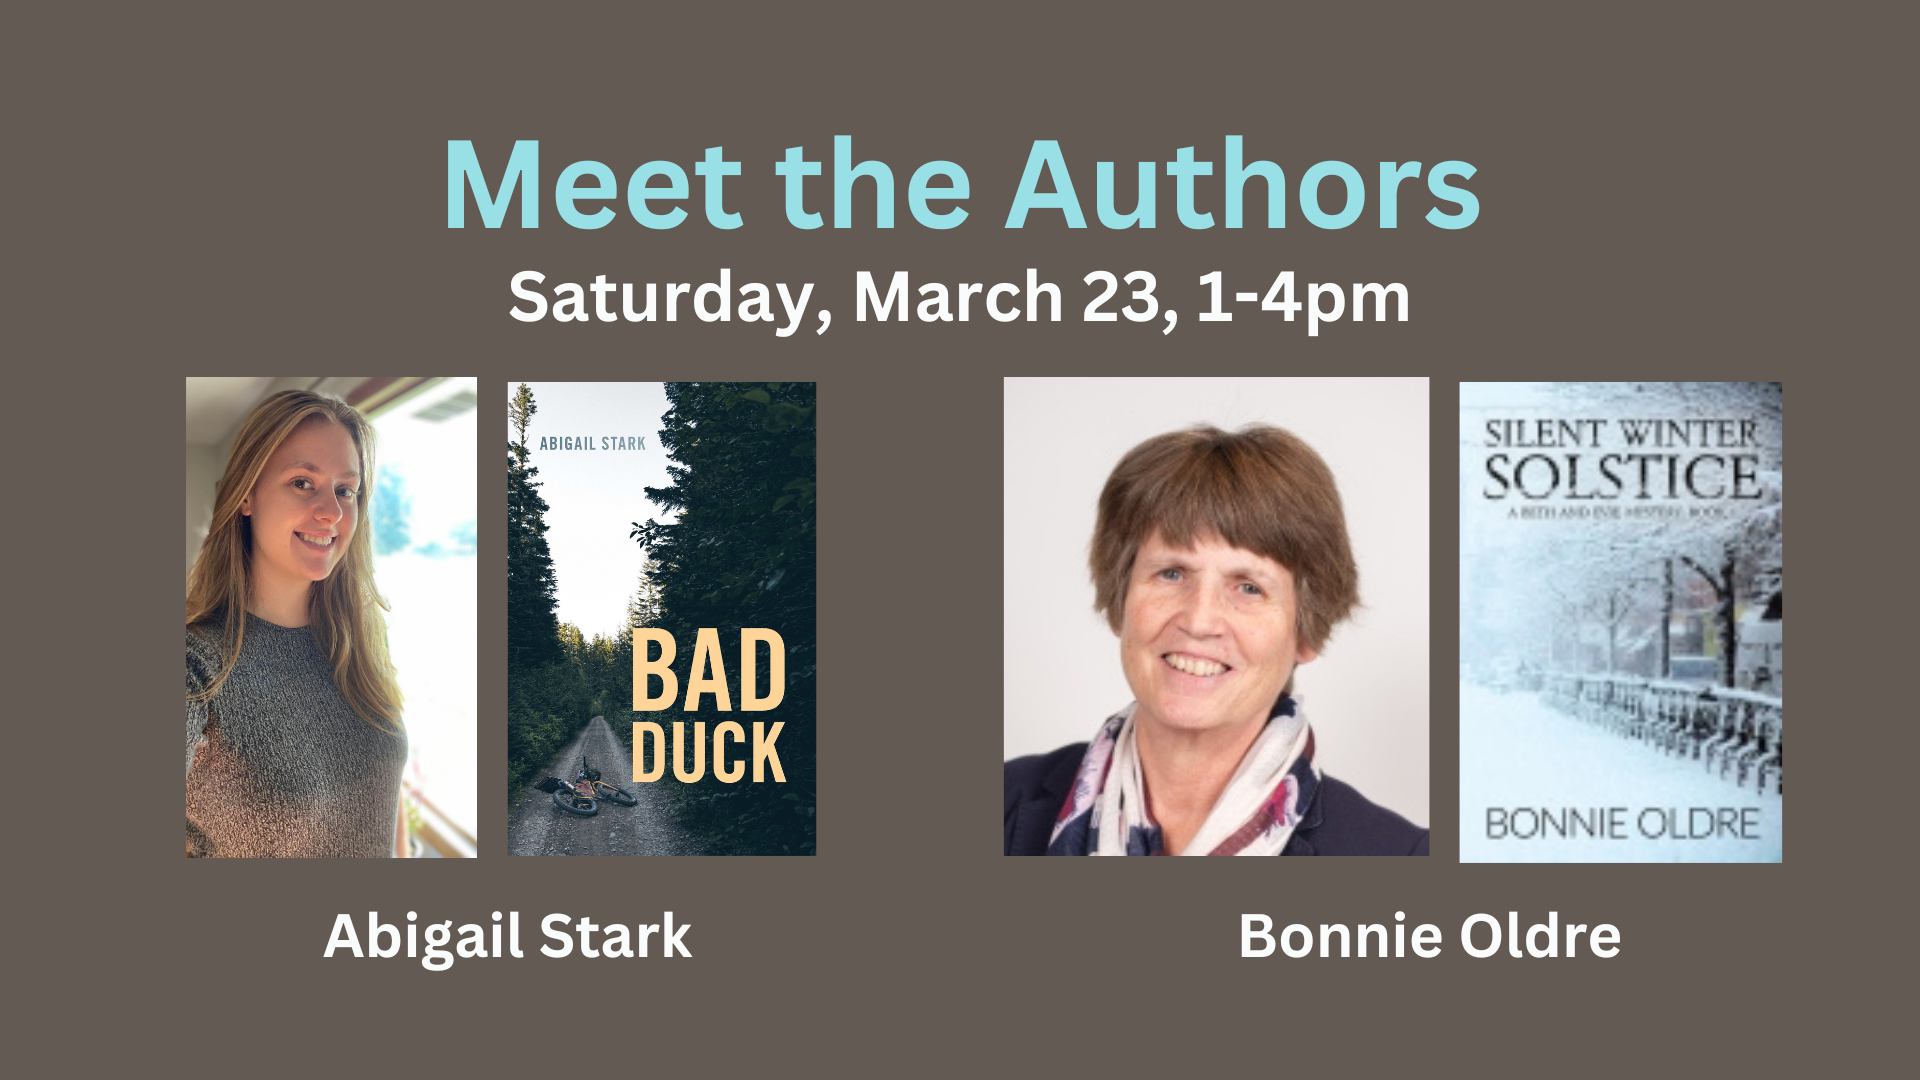 Meet the Authors-Abigail Stark and Bonnie Oldre